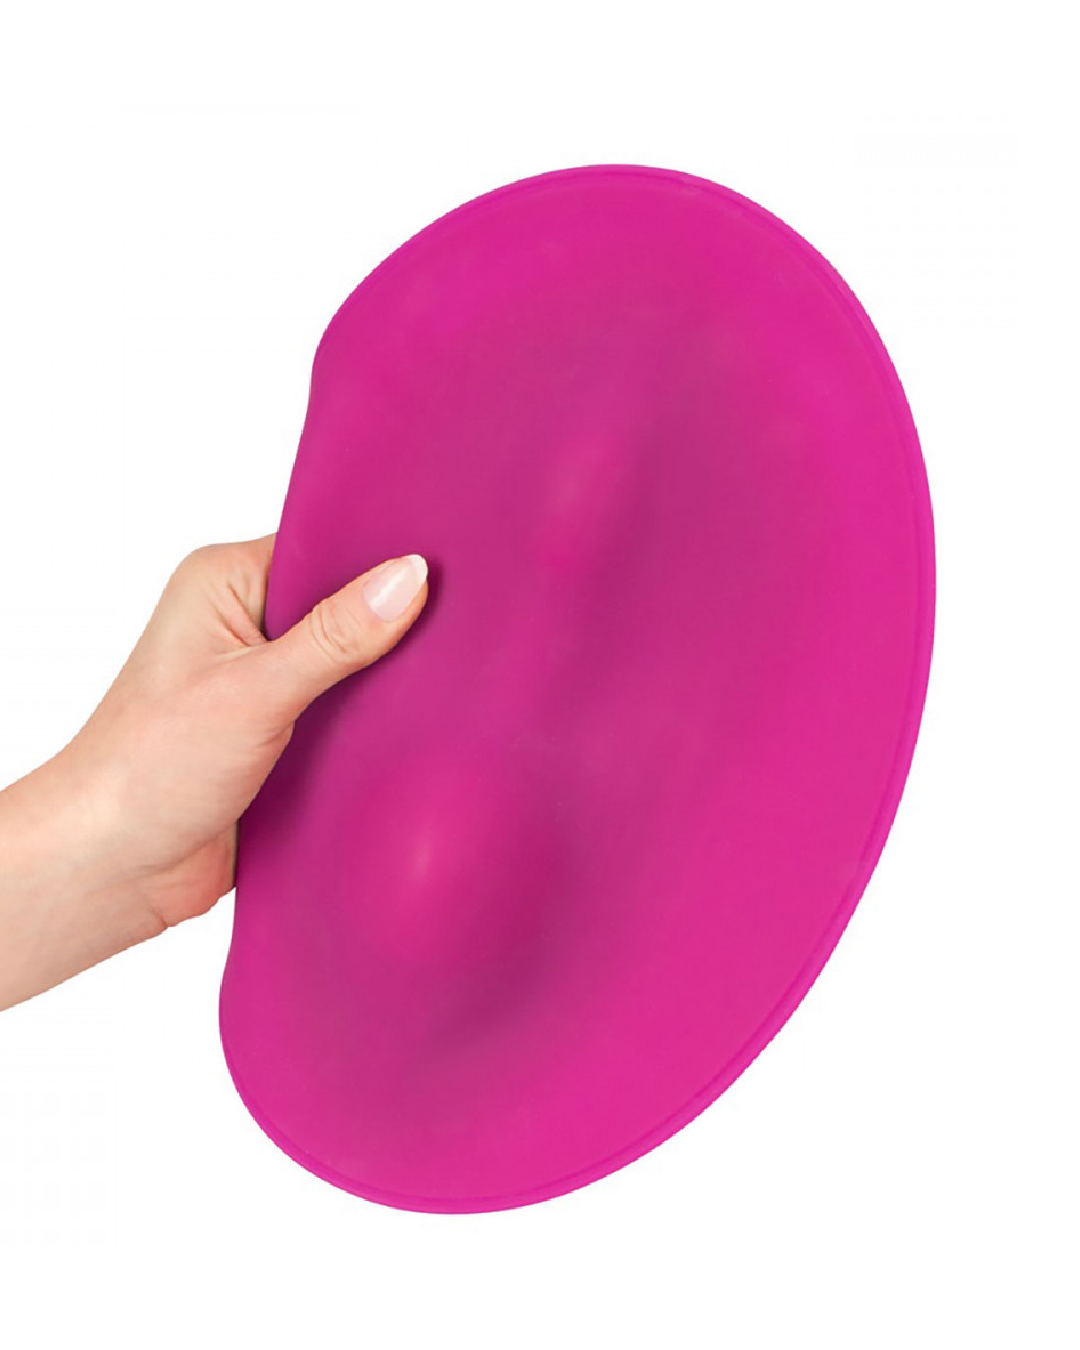 VibePad Ride On Hands-Free Humping Vibrator held in a hand